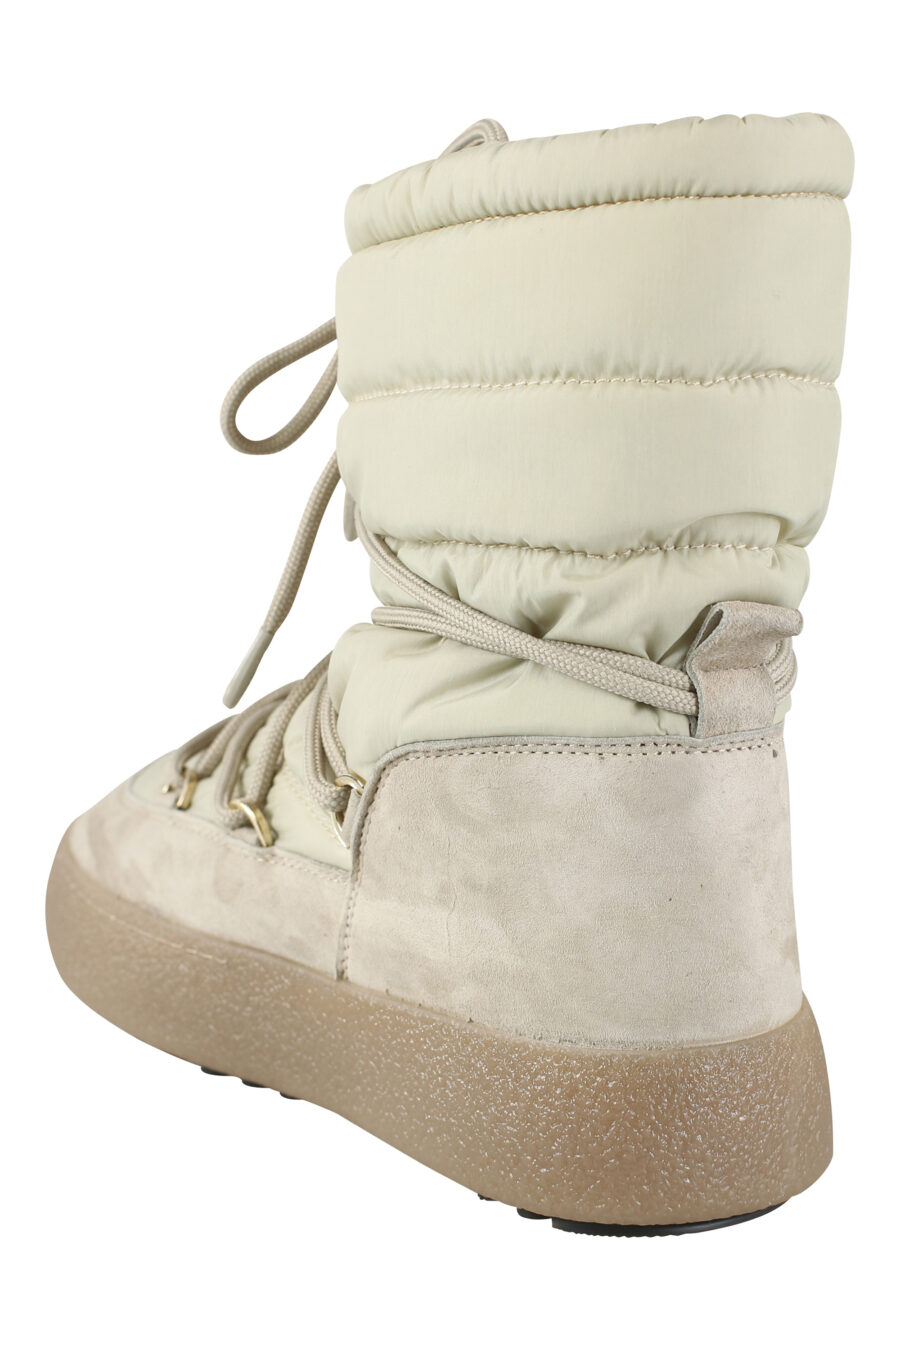 Sand coloured short snow boots with logo - IMG 9626